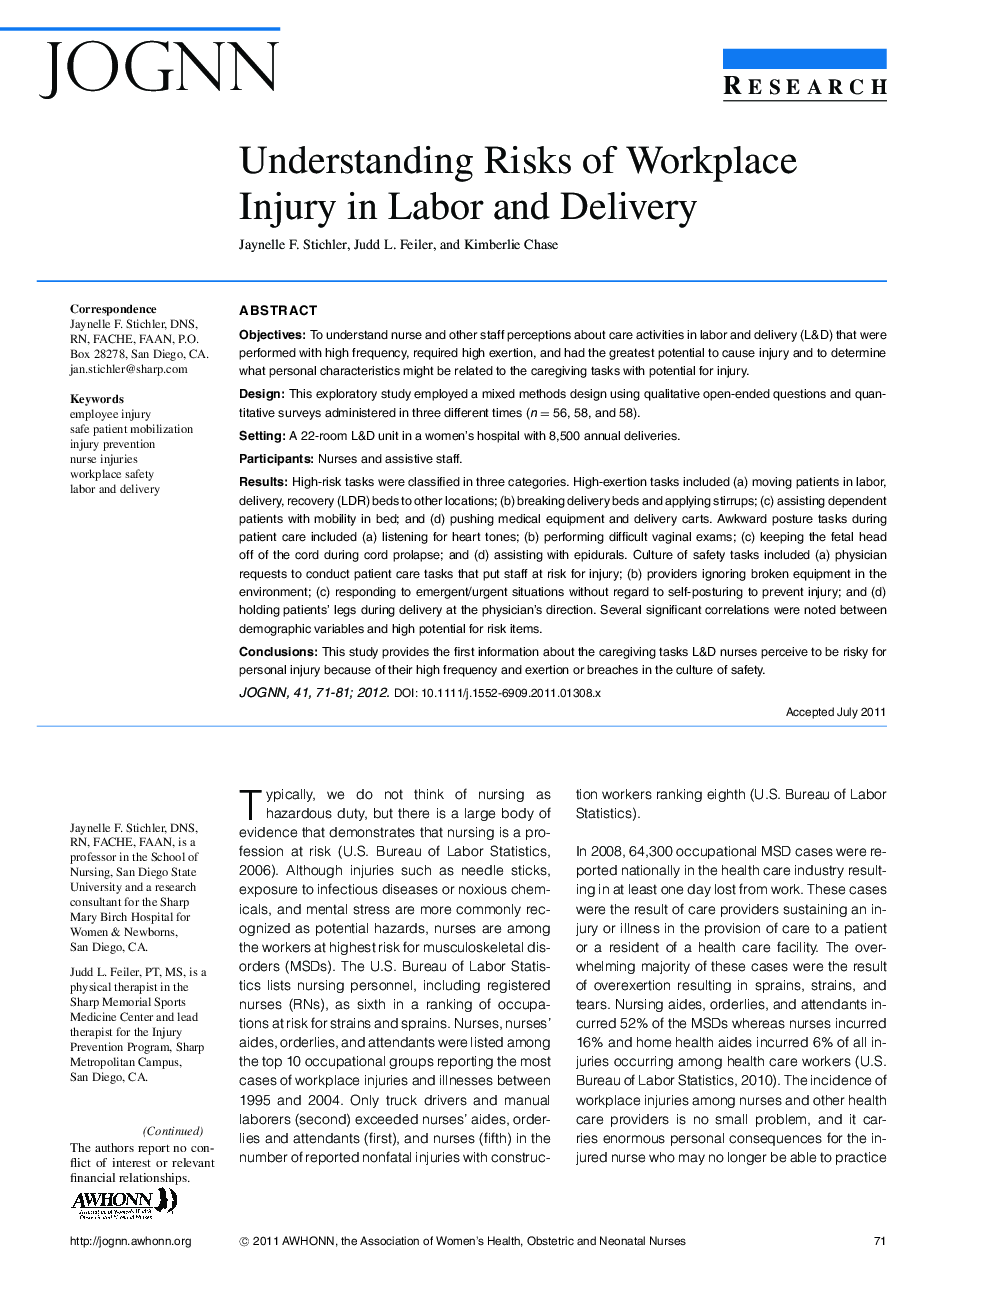 Understanding Risks of Workplace Injury in Labor and Delivery